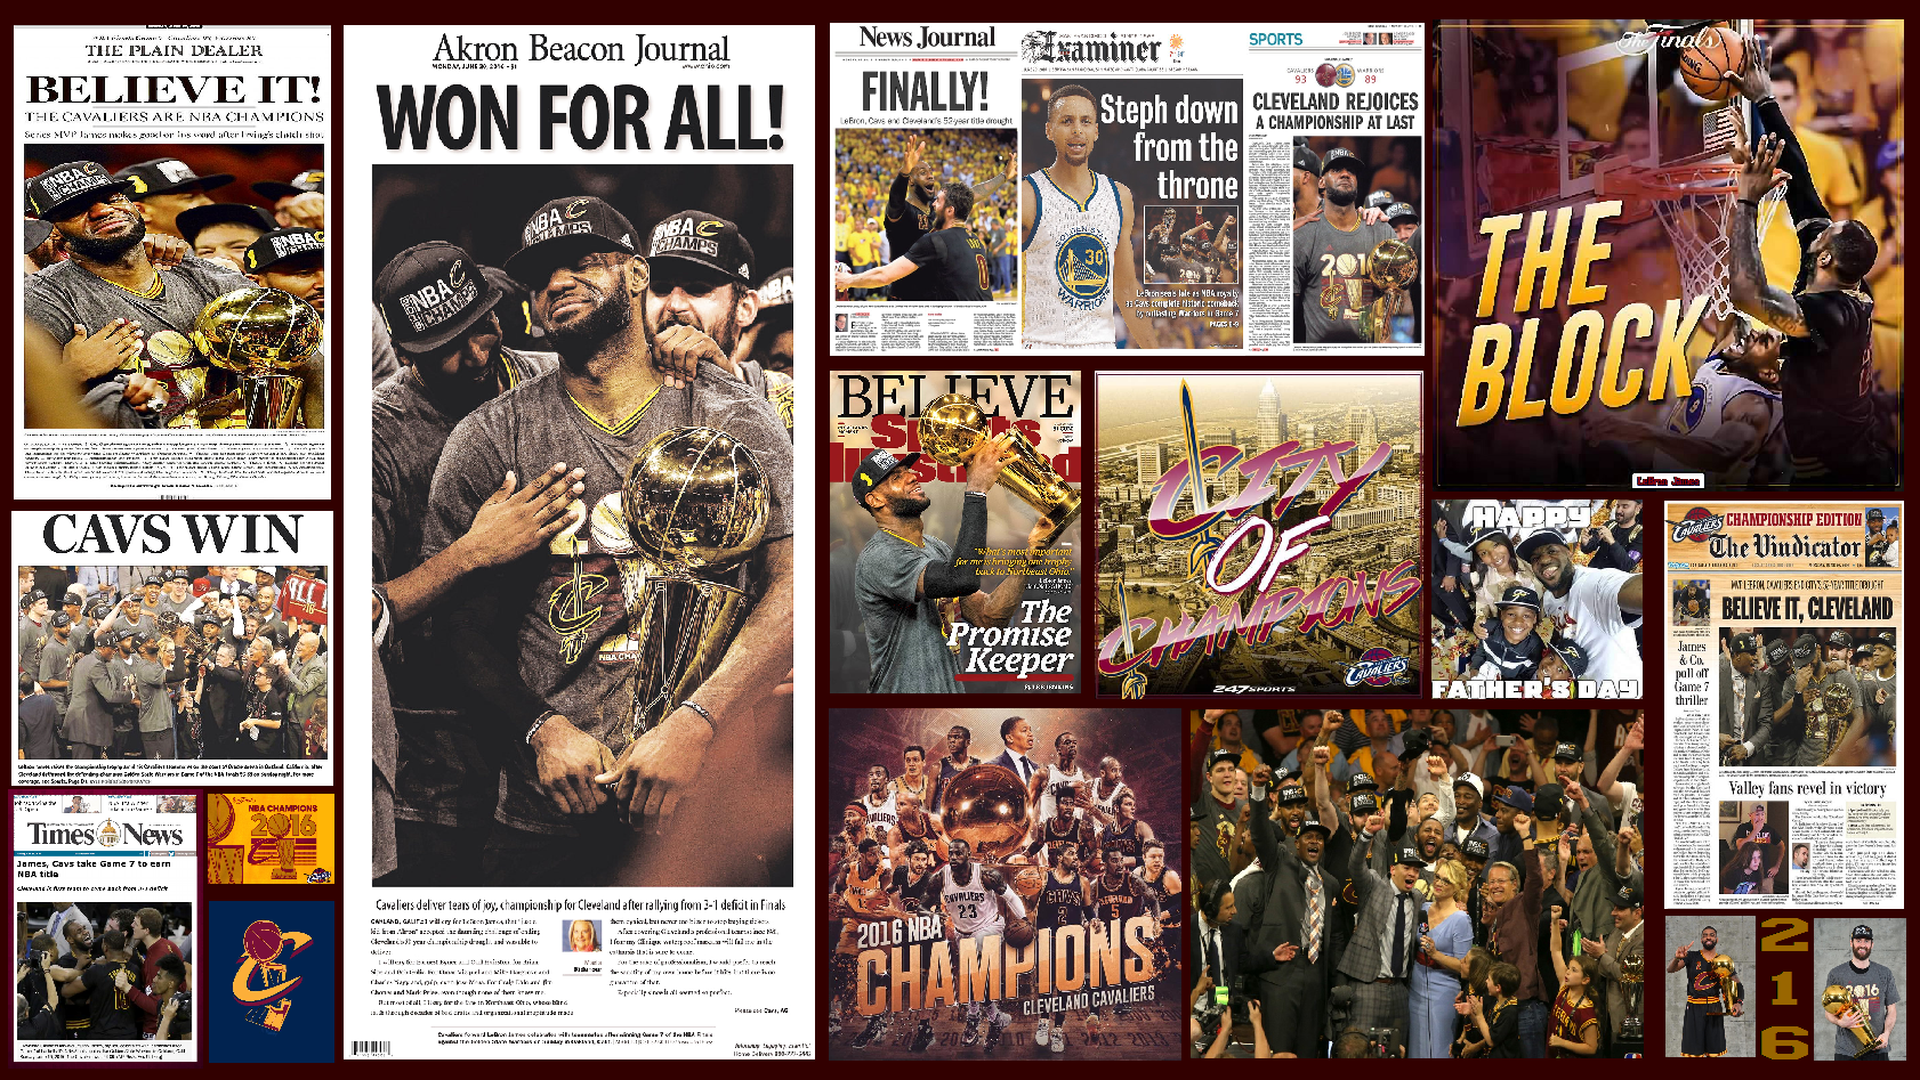 Cleveland Cavaliers 2016 Nba Champions - Pc Game - HD Wallpaper 